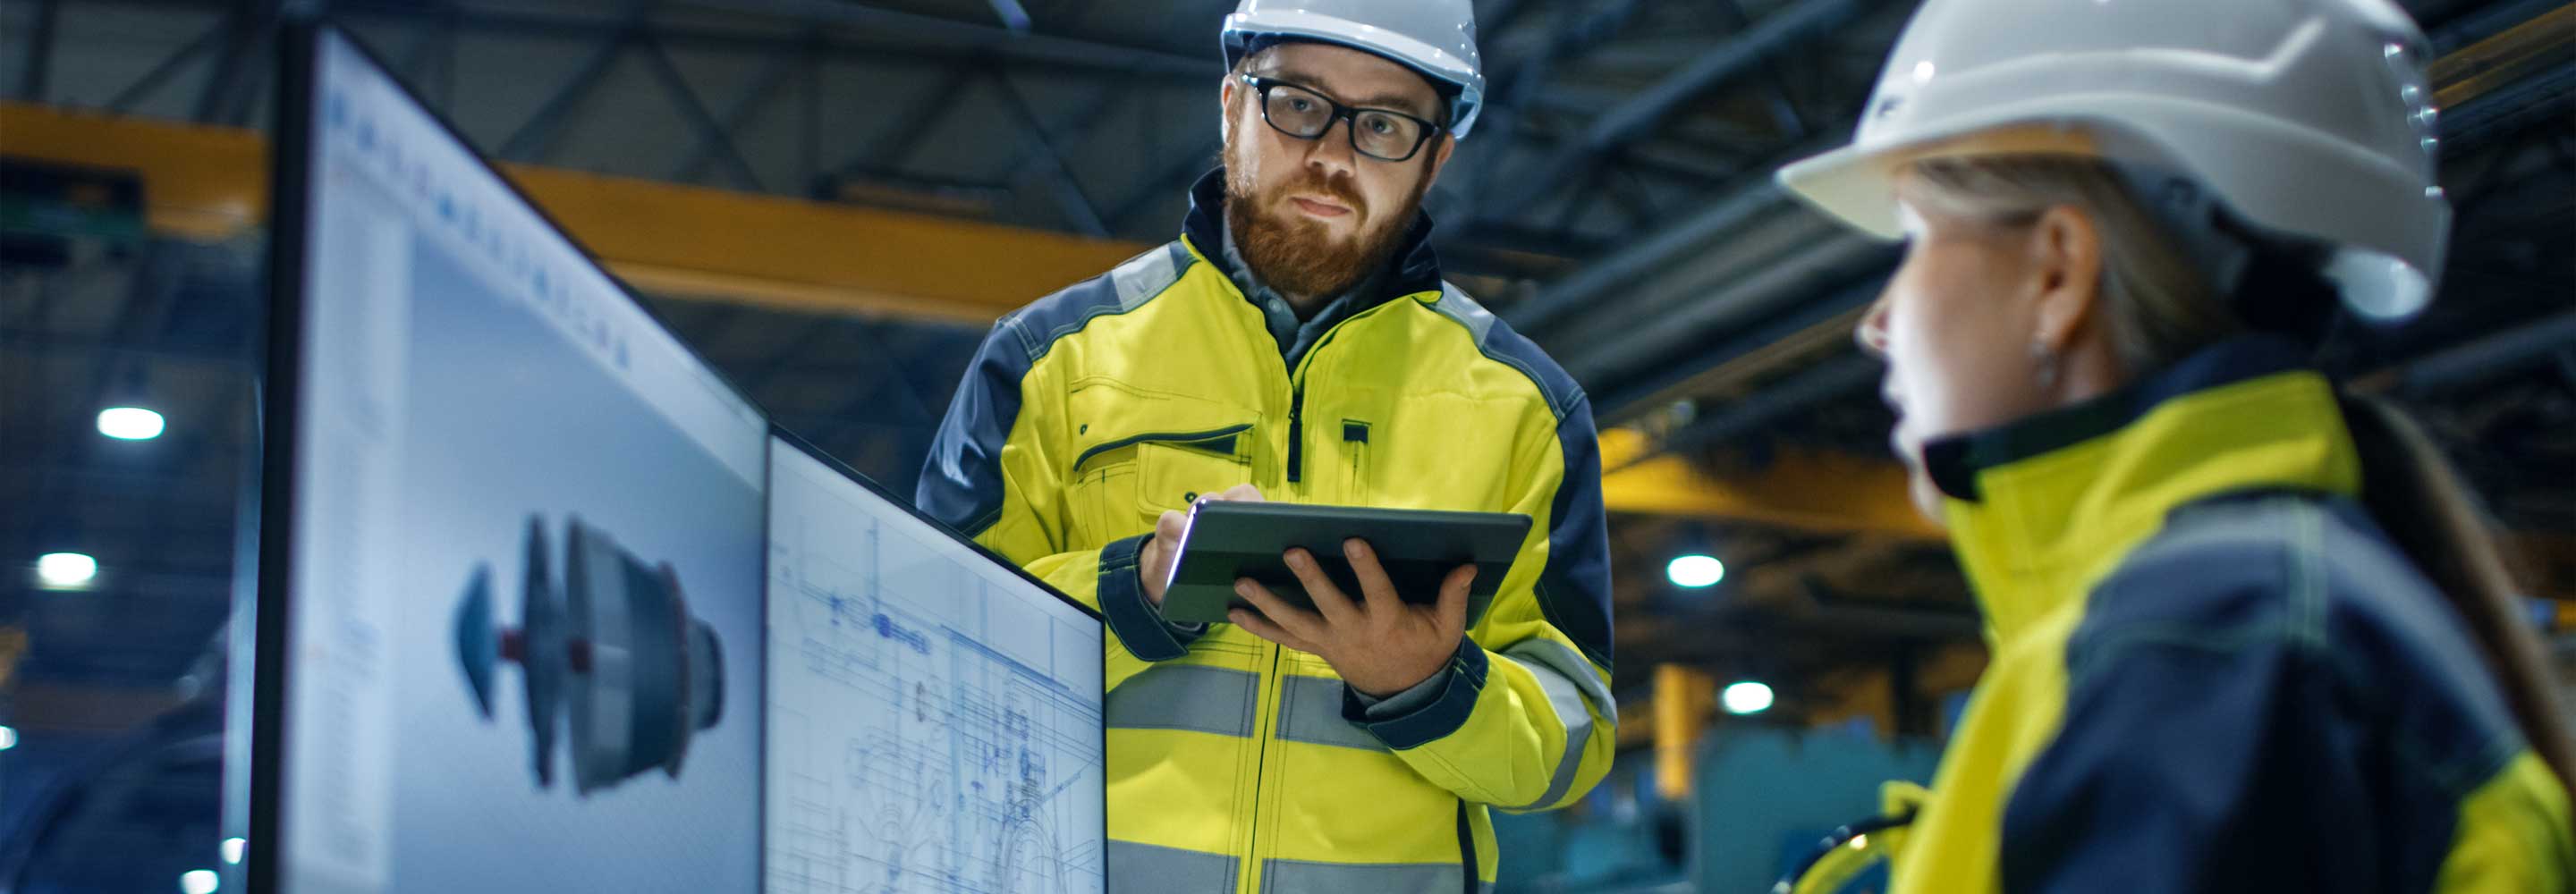 Engineer looking at data on a tablet and computer screen